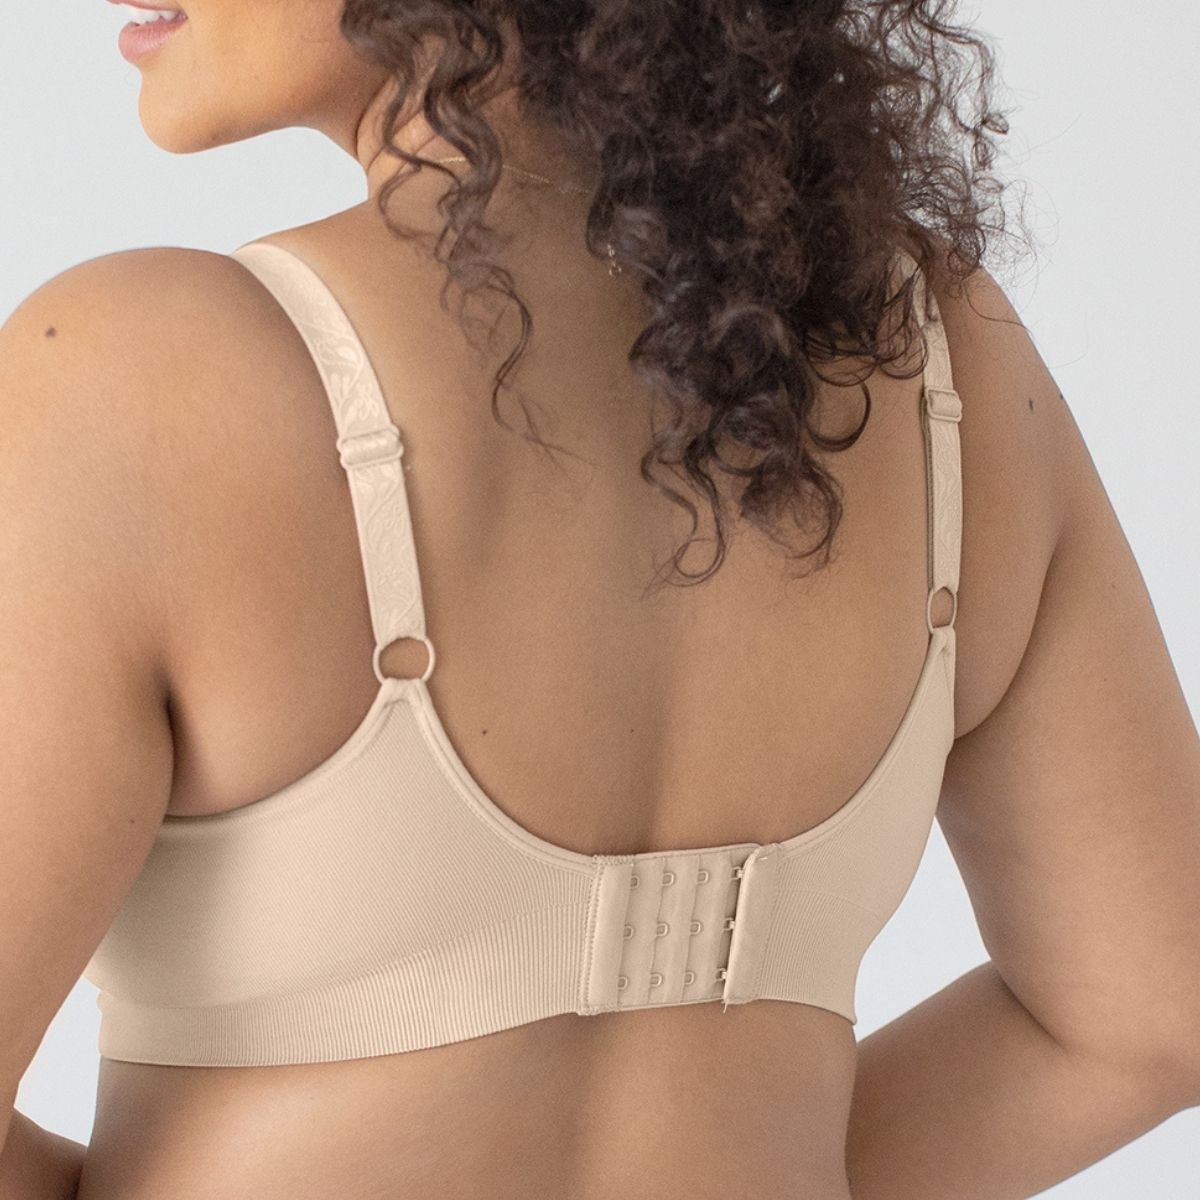 Davy Piper: Everything you're looking for in a bra!